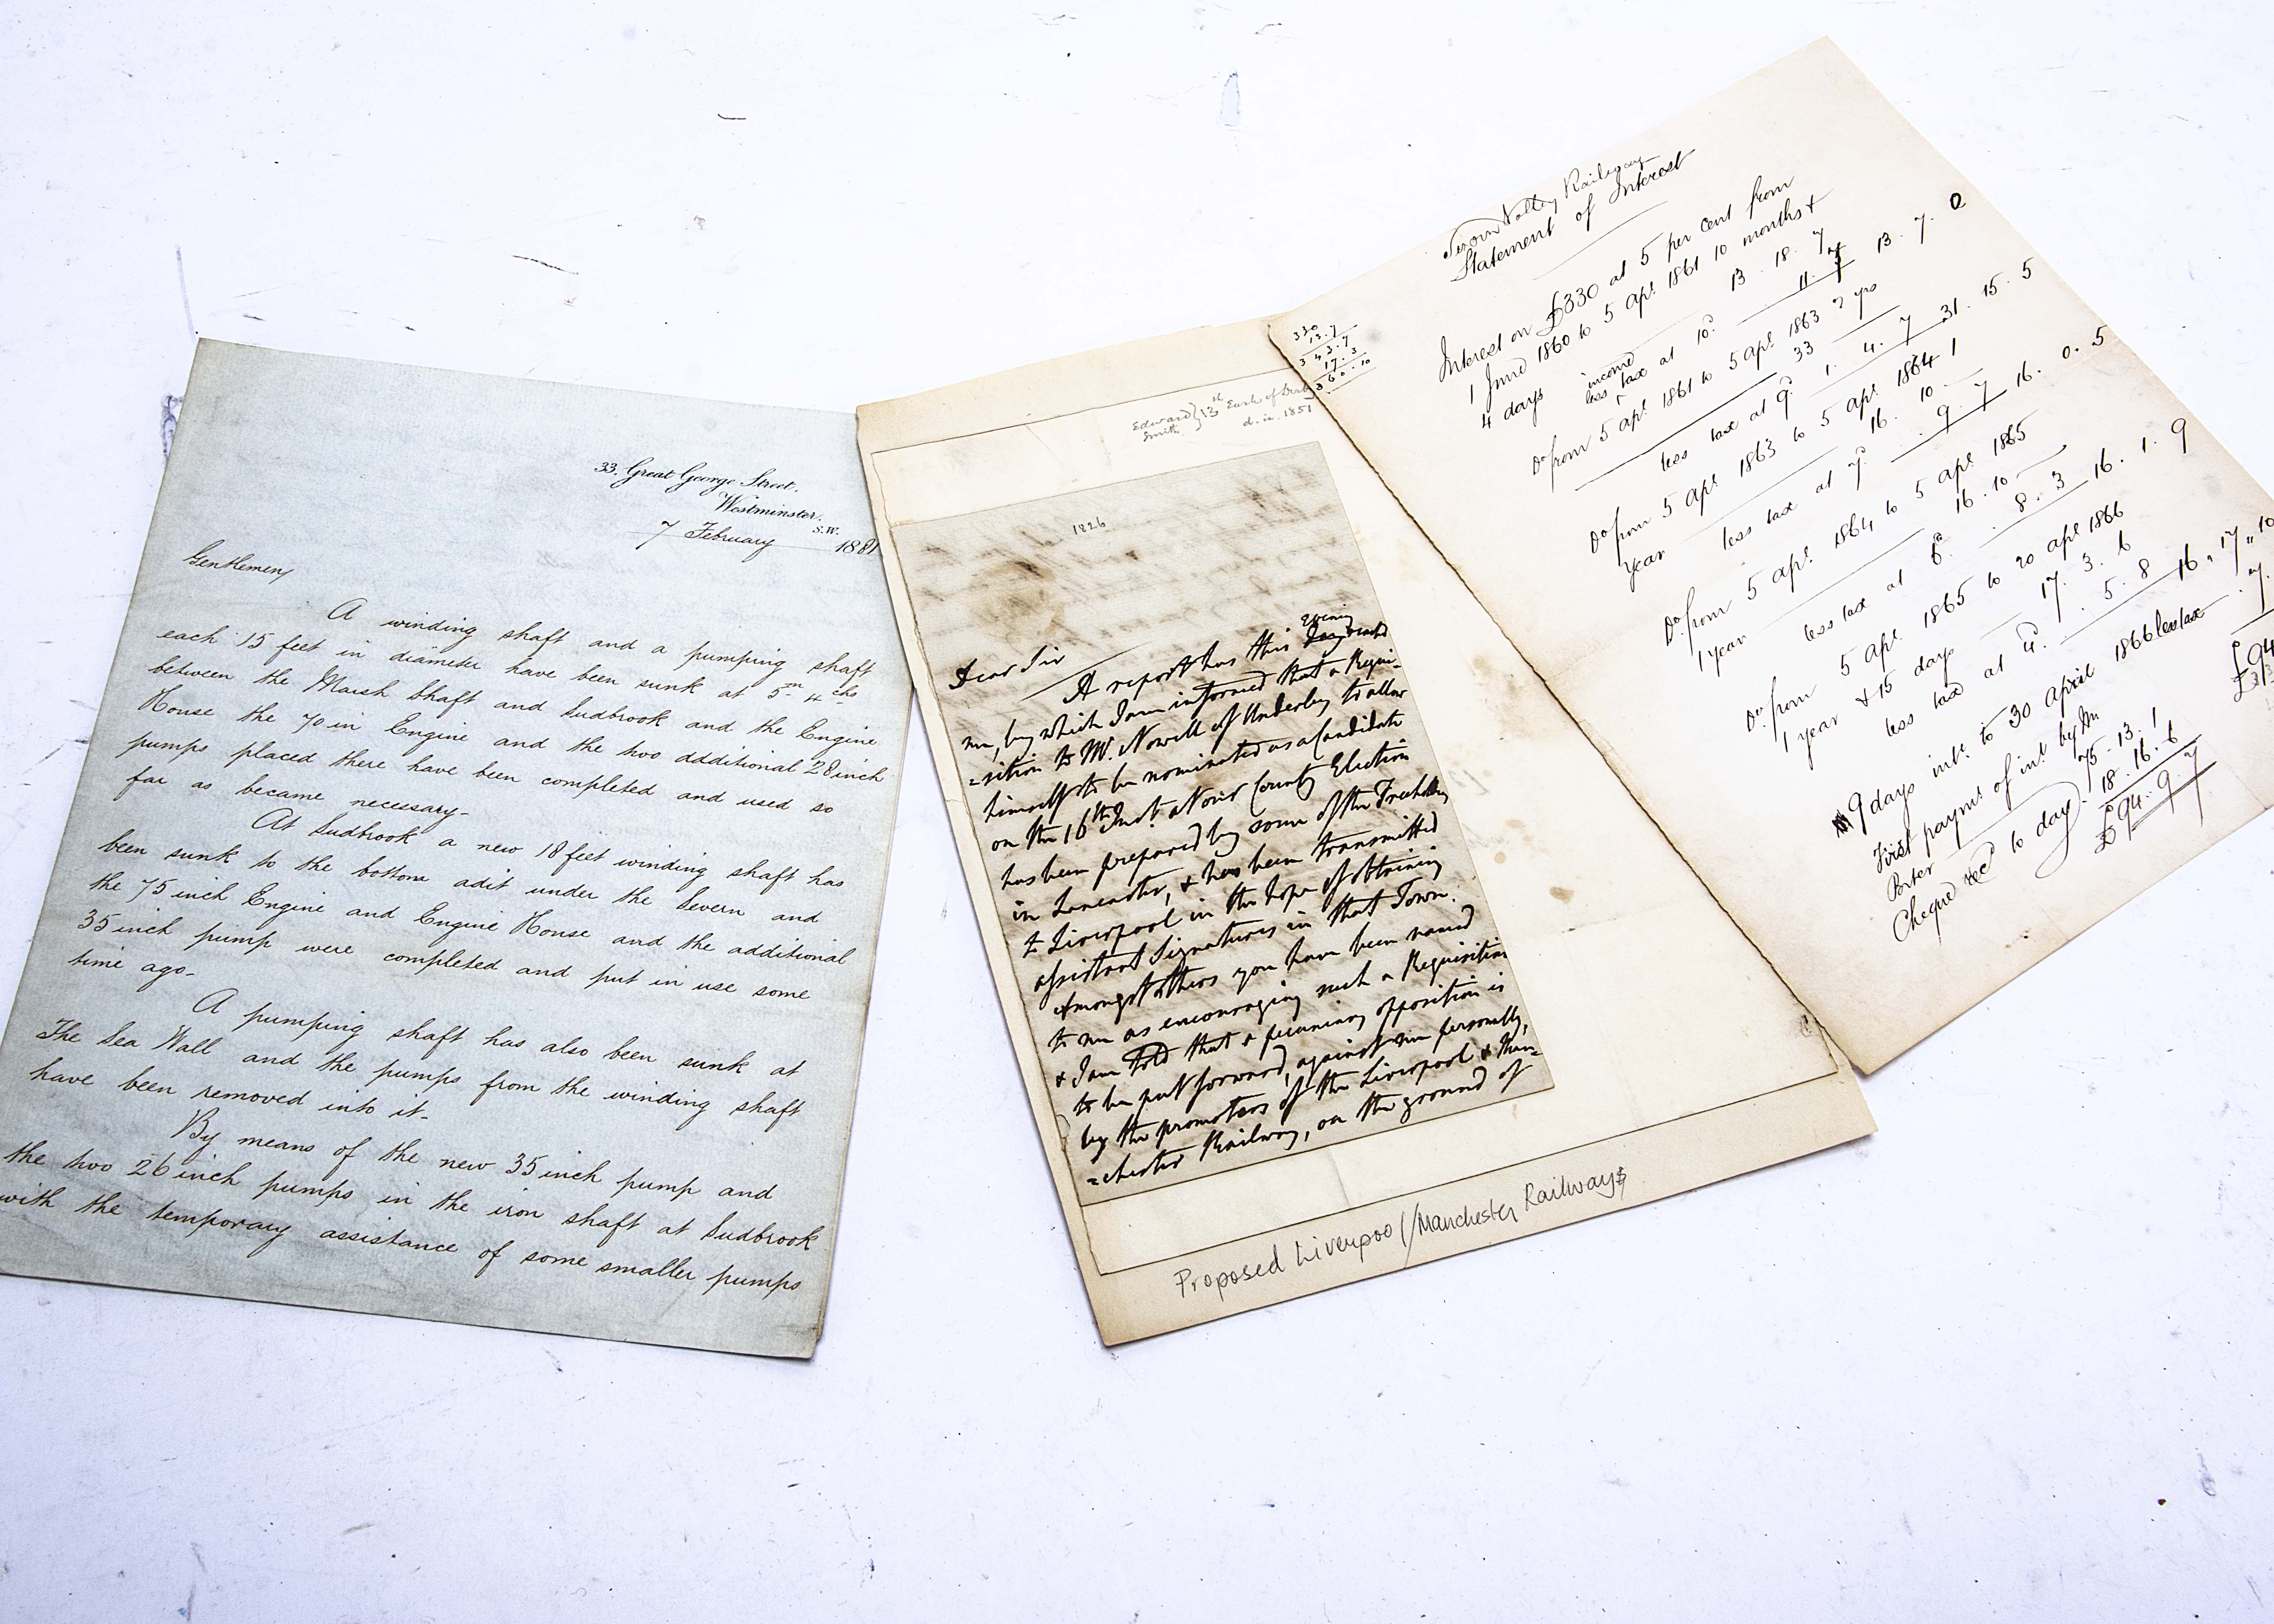 Nineteenth Century Original Letters of Railway Interest, two ink autograph letters signed - first